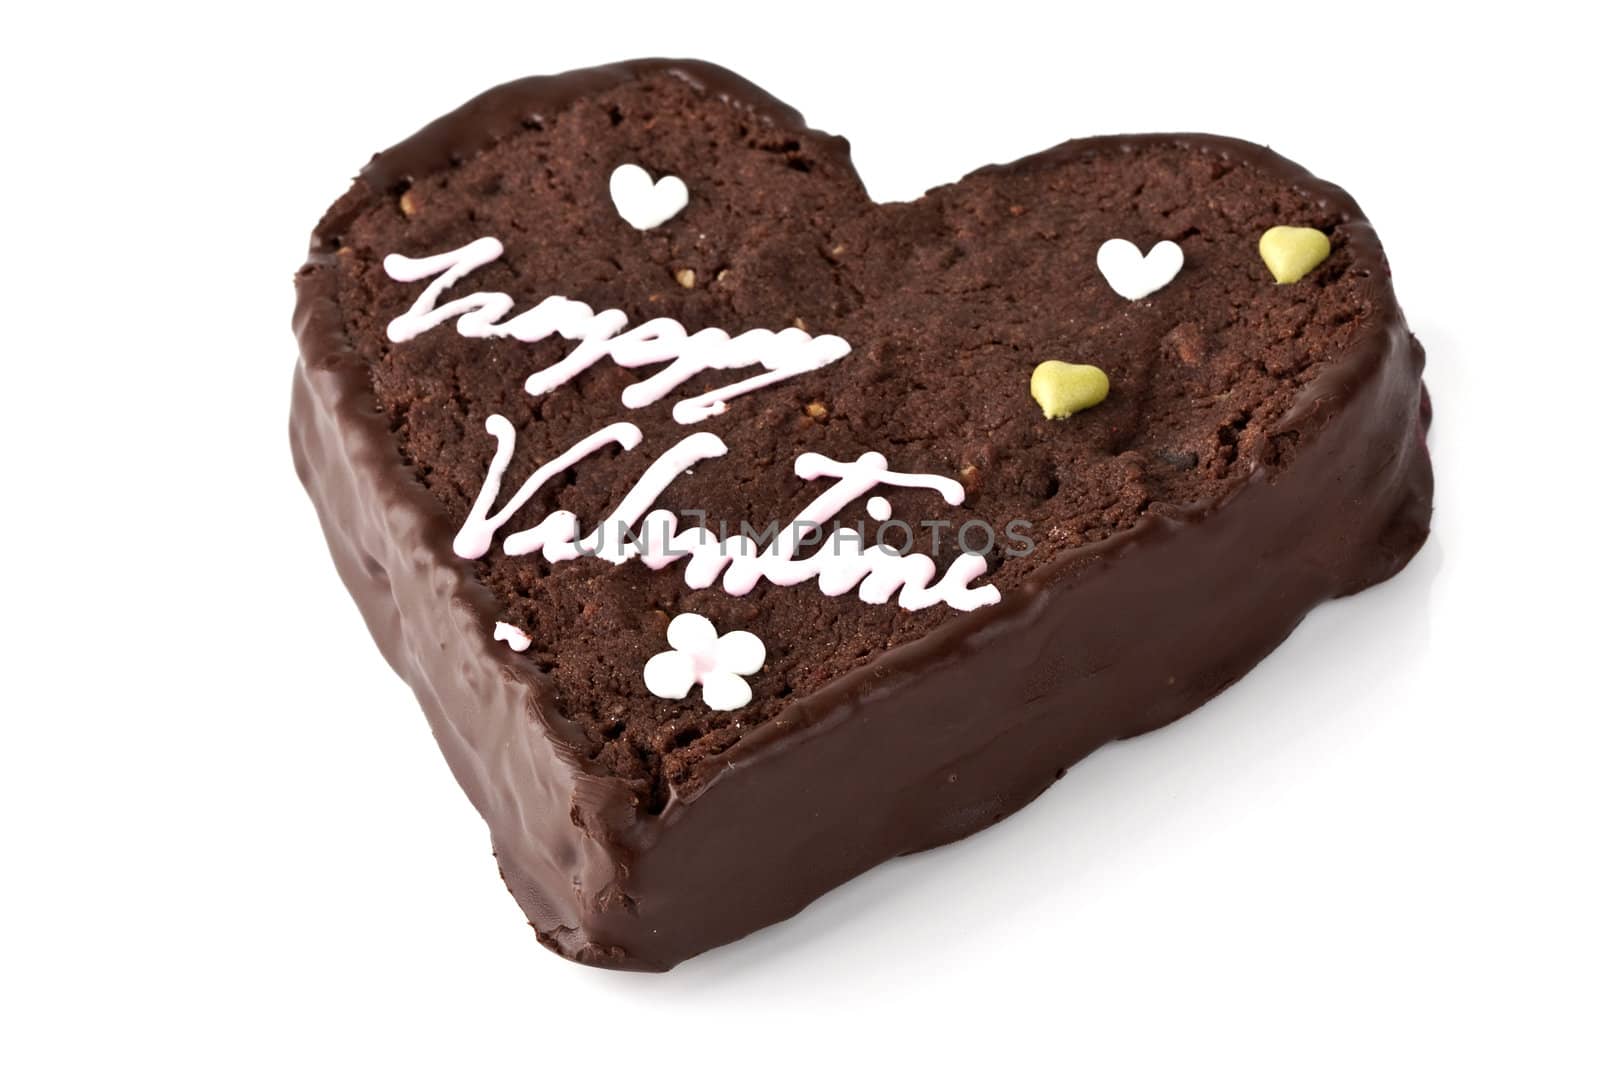 Heart shaped slice of a brownie on white background